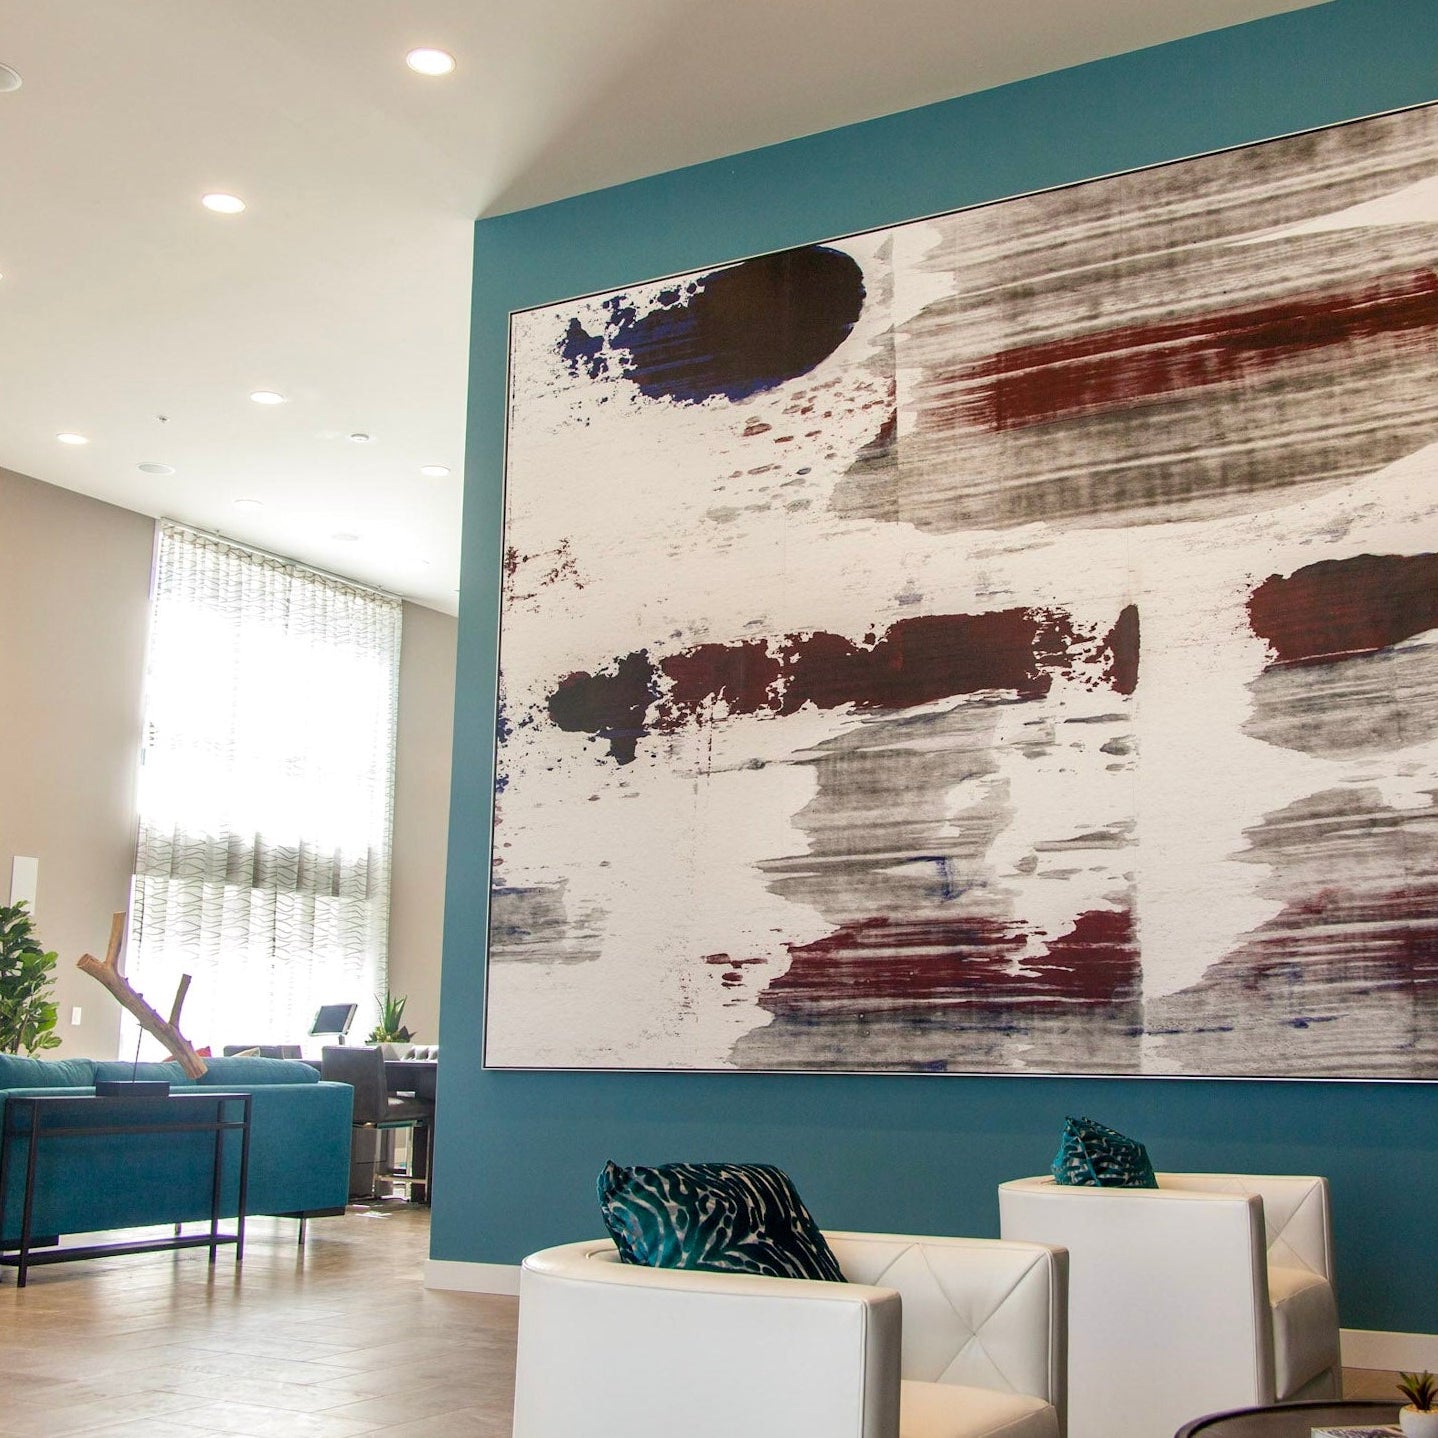 A large-format canvas painting with abstract forms in shades of brown, grey, and white hangs prominently in the reception area of Next on Sixth Apartments, mirroring the chic and modern design ethos of the space.